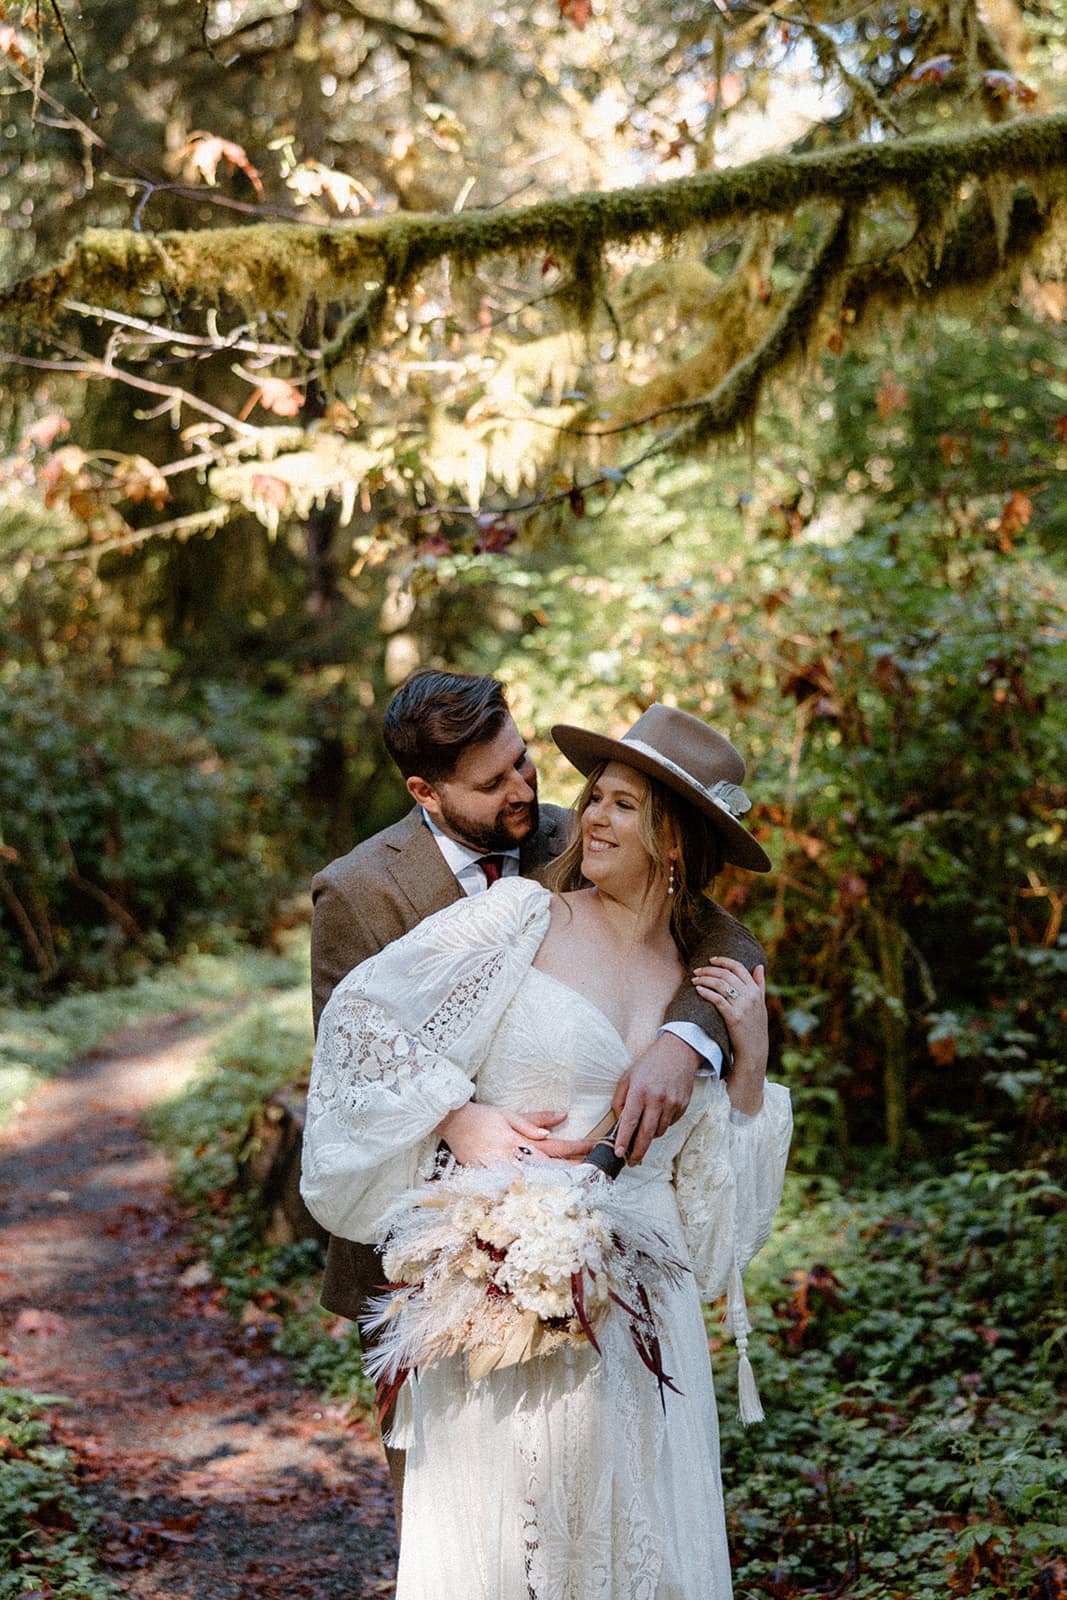 Bride and groom sharing an intimate embrace while eloping in the HoH rainforest in Washington.